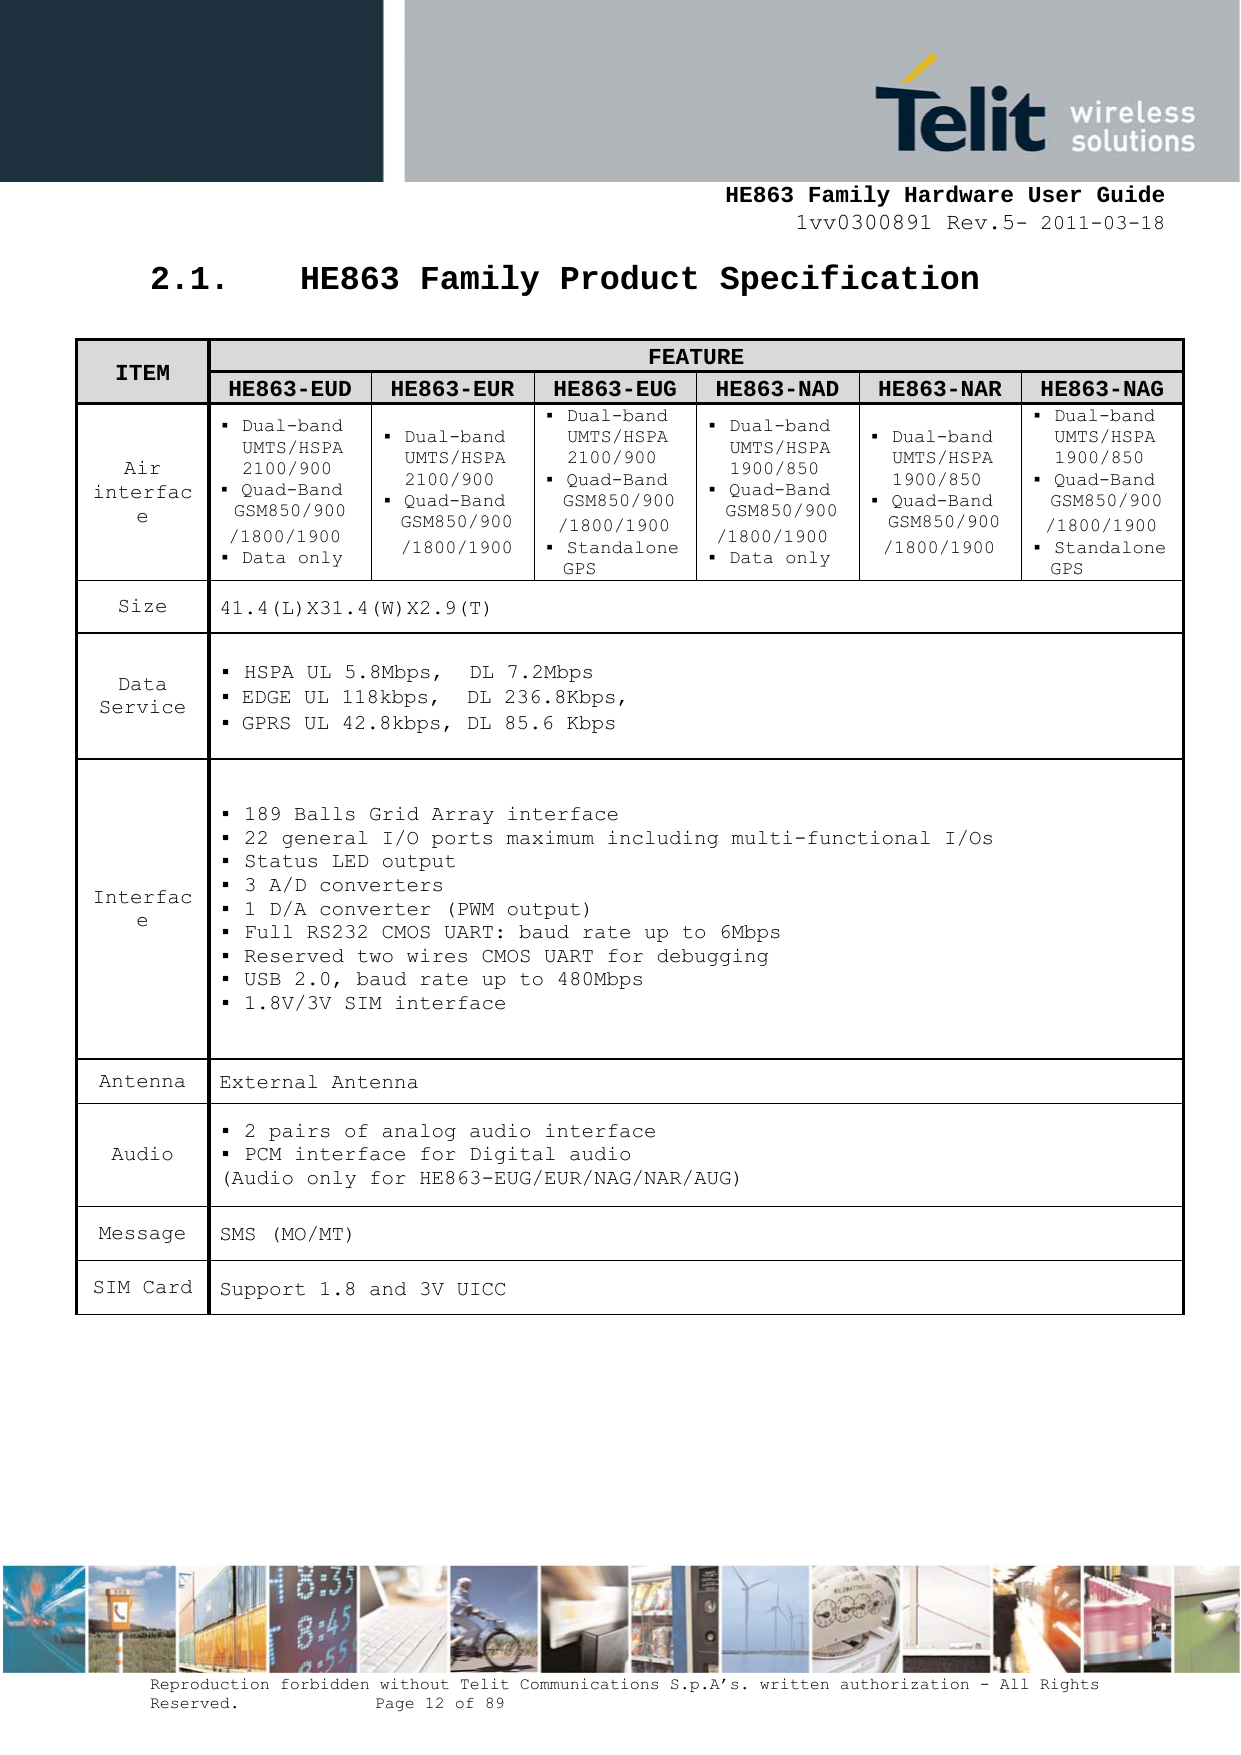     HE863 Family Hardware User Guide 1vv0300891 Rev.5- 2011-03-18    Reproduction forbidden without Telit Communications S.p.A’s. written authorization - All Rights Reserved.    Page 12 of 89  2.1. HE863 Family Product Specification  ITEM FEATUREHE863-EUD  HE863-EURHE863-EUGHE863-NAD HE863-NAR HE863-NAGAir  interface ▪ Dual-band  UMTS/HSPA 2100/900 ▪ Quad-Band  GSM850/900 /1800/1900 ▪ Data only ▪ Dual-band UMTS/HSPA 2100/900 ▪ Quad-Band GSM850/900 /1800/1900 ▪ Dual-band UMTS/HSPA 2100/900 ▪ Quad-Band GSM850/900 /1800/1900 ▪ Standalone GPS ▪ Dual-band UMTS/HSPA 1900/850 ▪ Quad-Band GSM850/900 /1800/1900 ▪ Data only ▪ Dual-band  UMTS/HSPA 1900/850 ▪ Quad-Band  GSM850/900 /1800/1900 ▪ Dual-band UMTS/HSPA 1900/850 ▪ Quad-Band GSM850/900 /1800/1900 ▪ Standalone GPS Size  41.4(L)X31.4(W)X2.9(T) Data Service ▪ HSPA UL 5.8Mbps,  DL 7.2Mbps ▪ EDGE UL 118kbps,  DL 236.8Kbps, ▪ GPRS UL 42.8kbps, DL 85.6 Kbps Interface ▪ 189 Balls Grid Array interface ▪ 22 general I/O ports maximum including multi-functional I/Os ▪ Status LED output ▪ 3 A/D converters ▪ 1 D/A converter (PWM output) ▪ Full RS232 CMOS UART: baud rate up to 6Mbps ▪ Reserved two wires CMOS UART for debugging ▪ USB 2.0, baud rate up to 480Mbps ▪ 1.8V/3V SIM interface Antenna  External Antenna Audio ▪ 2 pairs of analog audio interface ▪ PCM interface for Digital audio (Audio only for HE863-EUG/EUR/NAG/NAR/AUG) Message  SMS (MO/MT) SIM Card  Support 1.8 and 3V UICC 